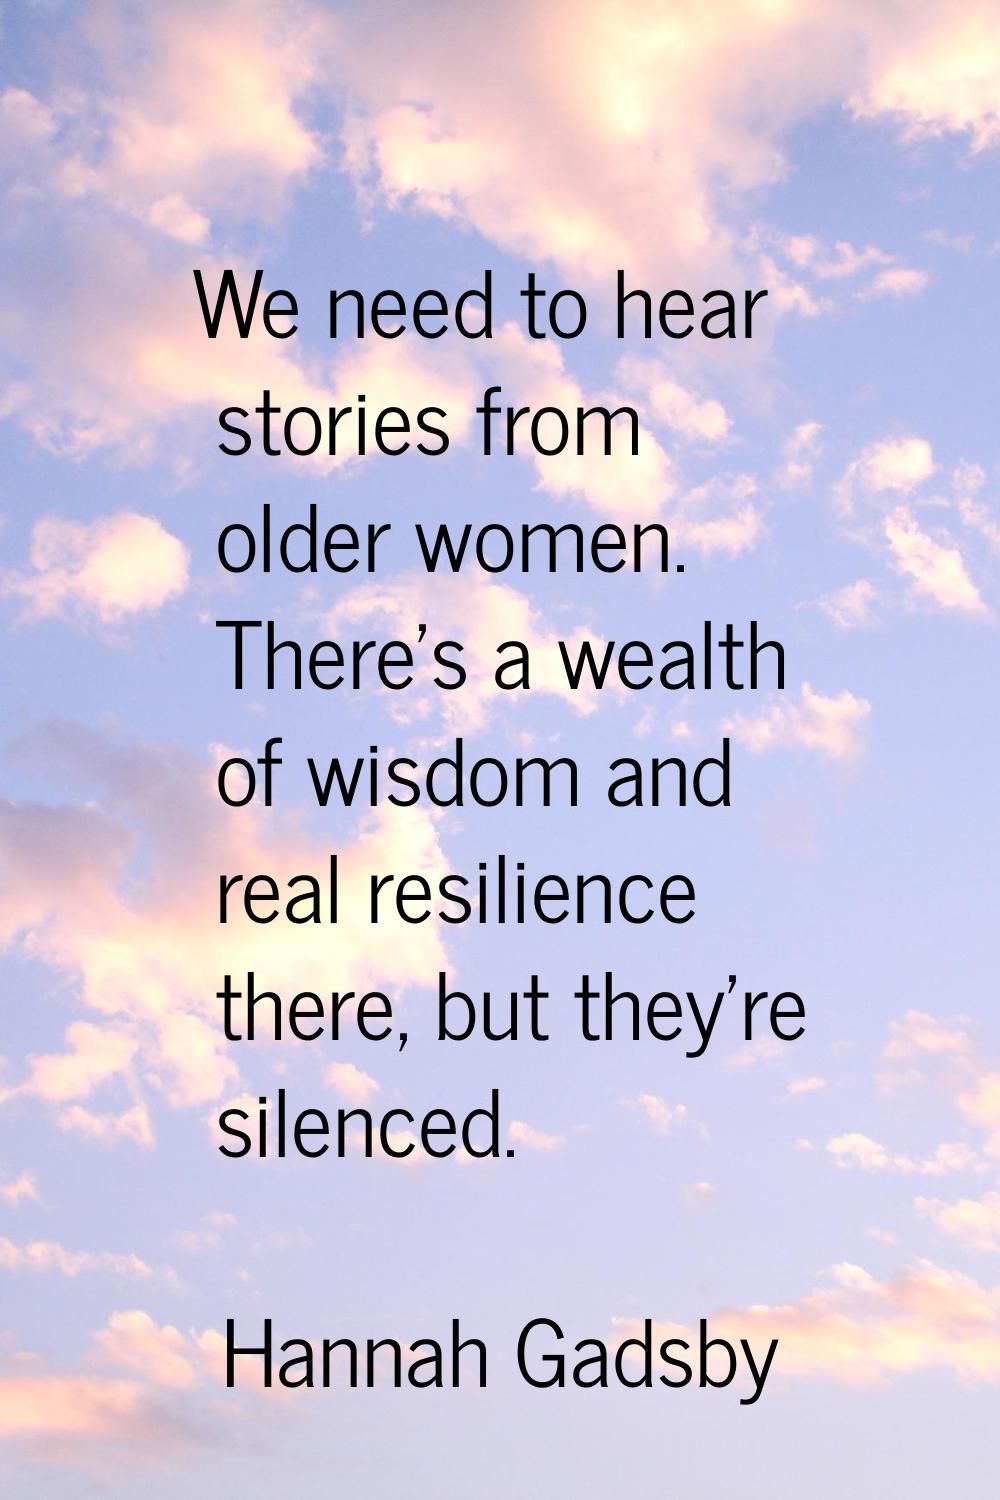 We need to hear stories from older women. There's a wealth of wisdom and real resilience there, but